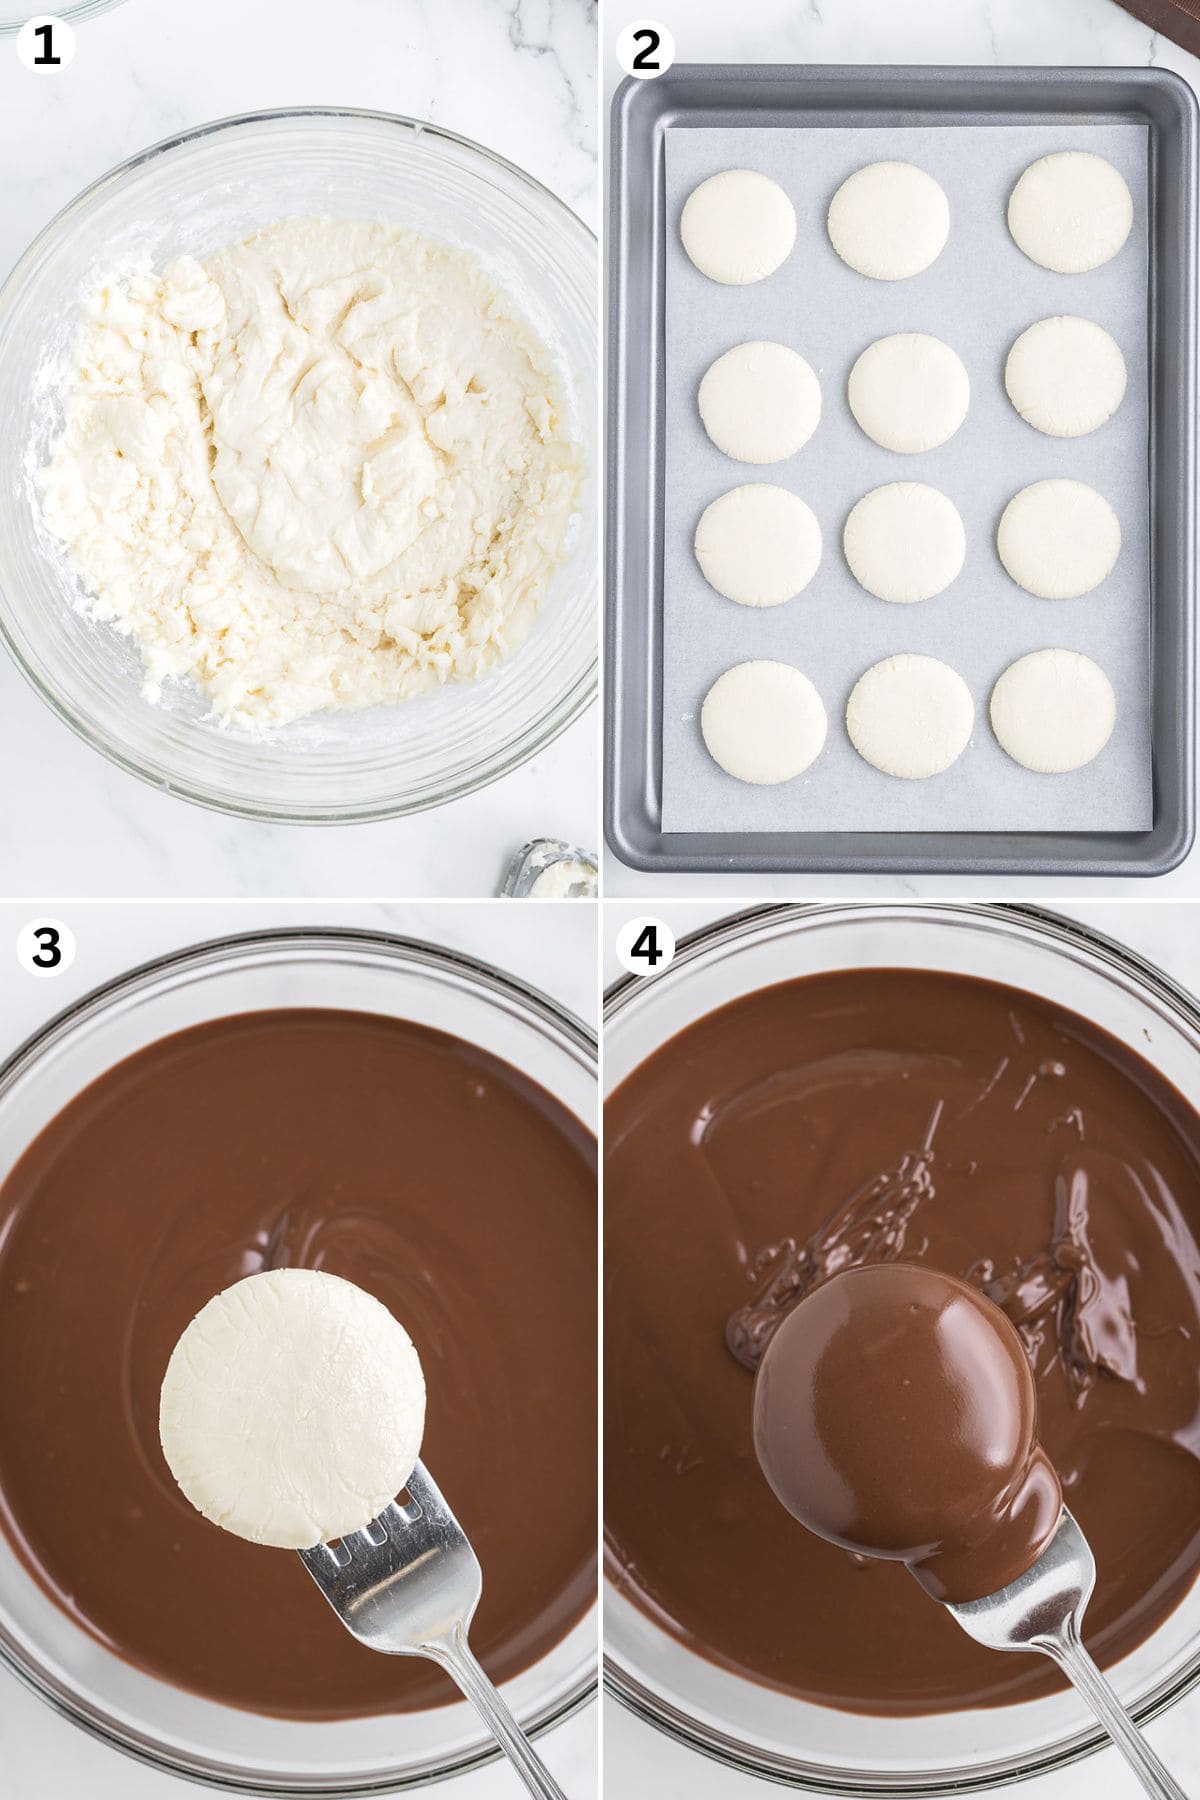 patties mixture in a mixing bowl. flatten the dough and placed on baking sheet. dip the dough into melted chocolate.